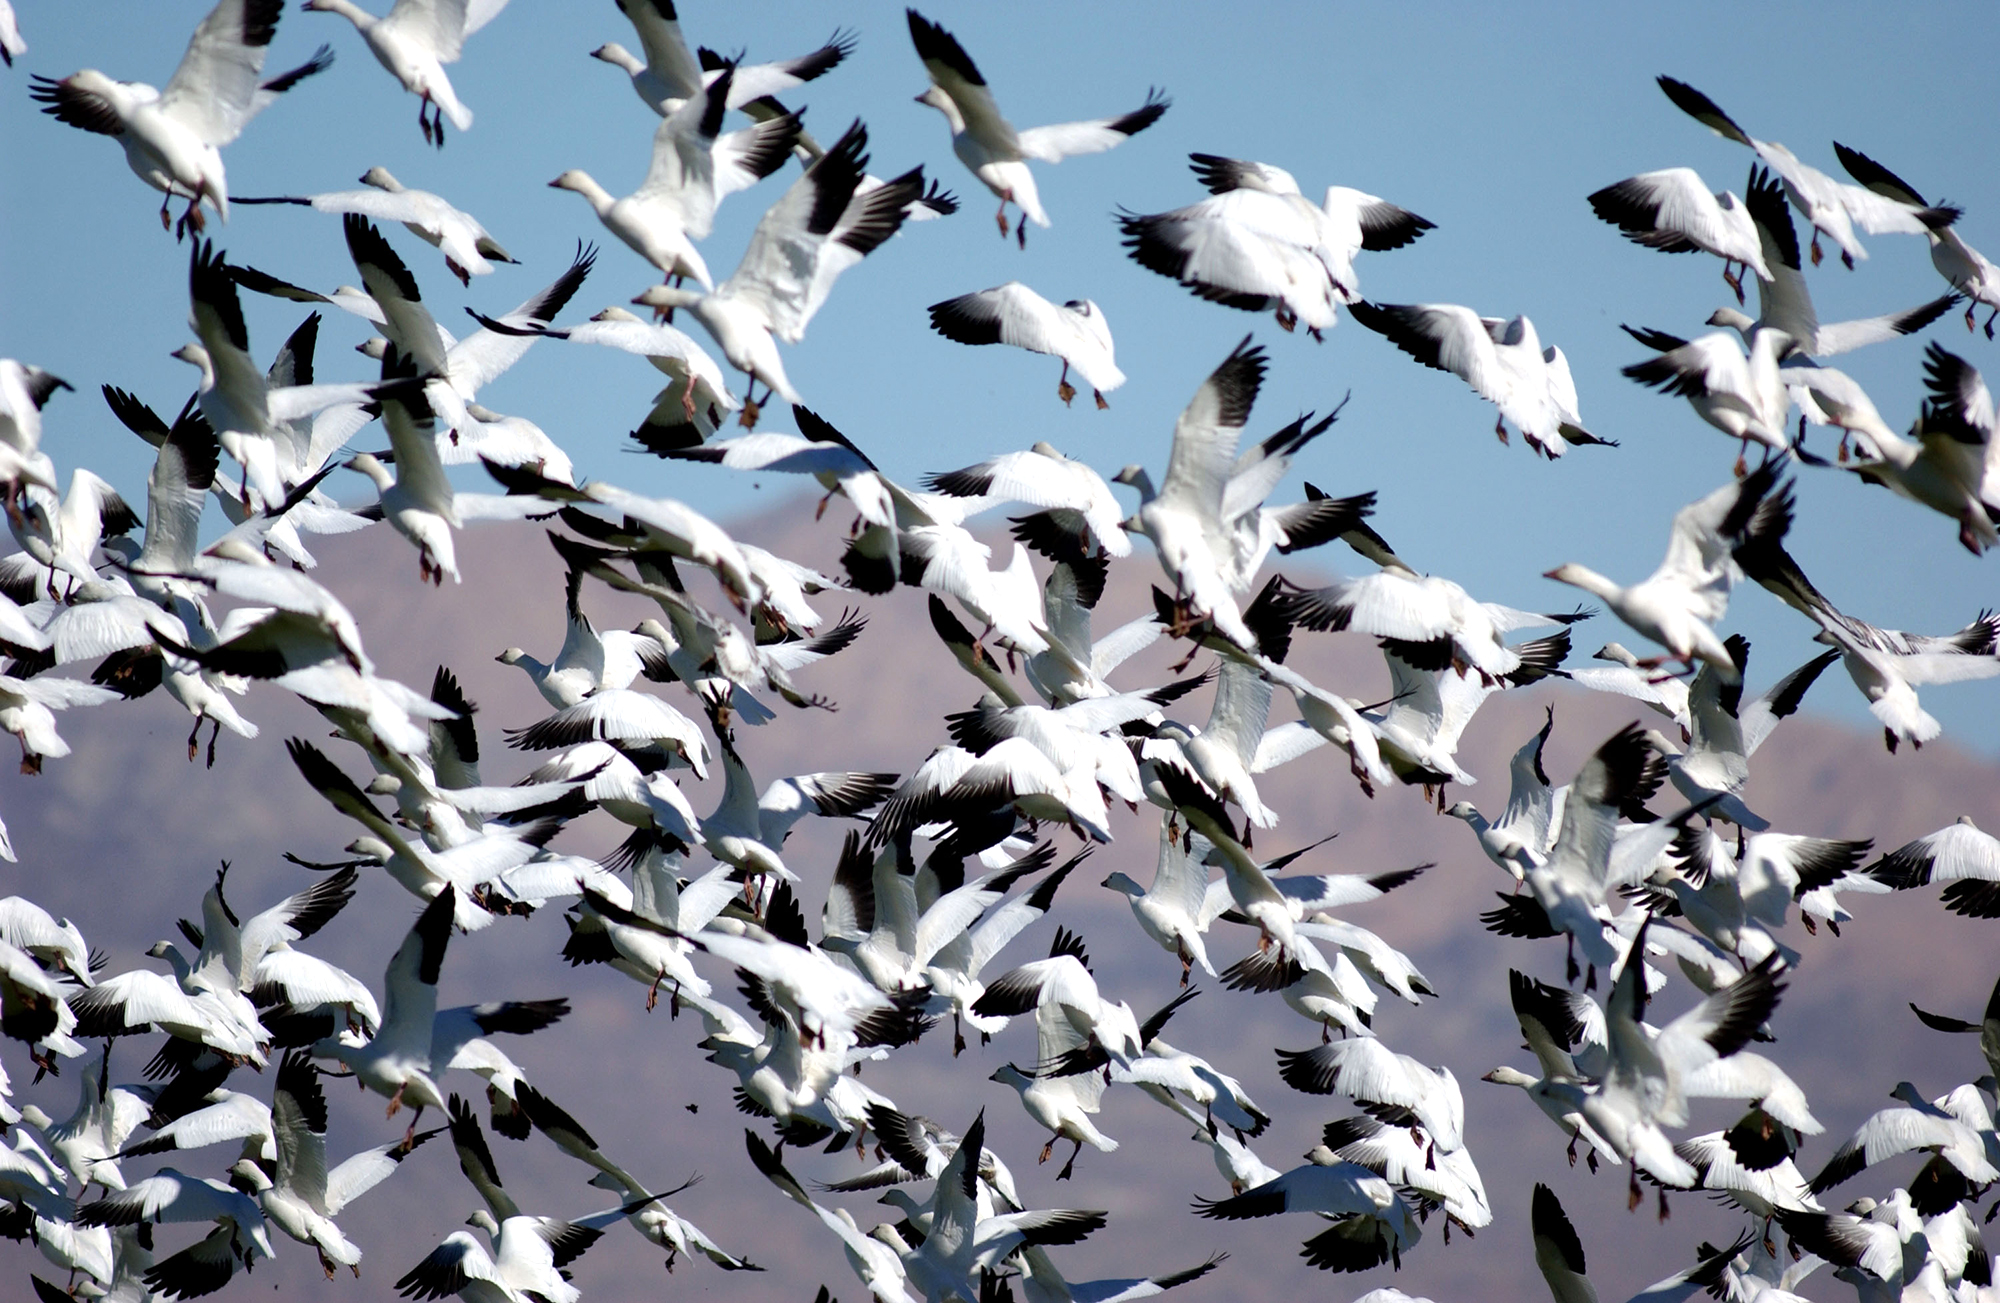 <i>David McNew/Getty Images</i><br/>A new strain of bird flu has killed hundreds of snow geese in Colorado. Snow geese here fly over the Salton Sea National Wildlife Refuge in California.